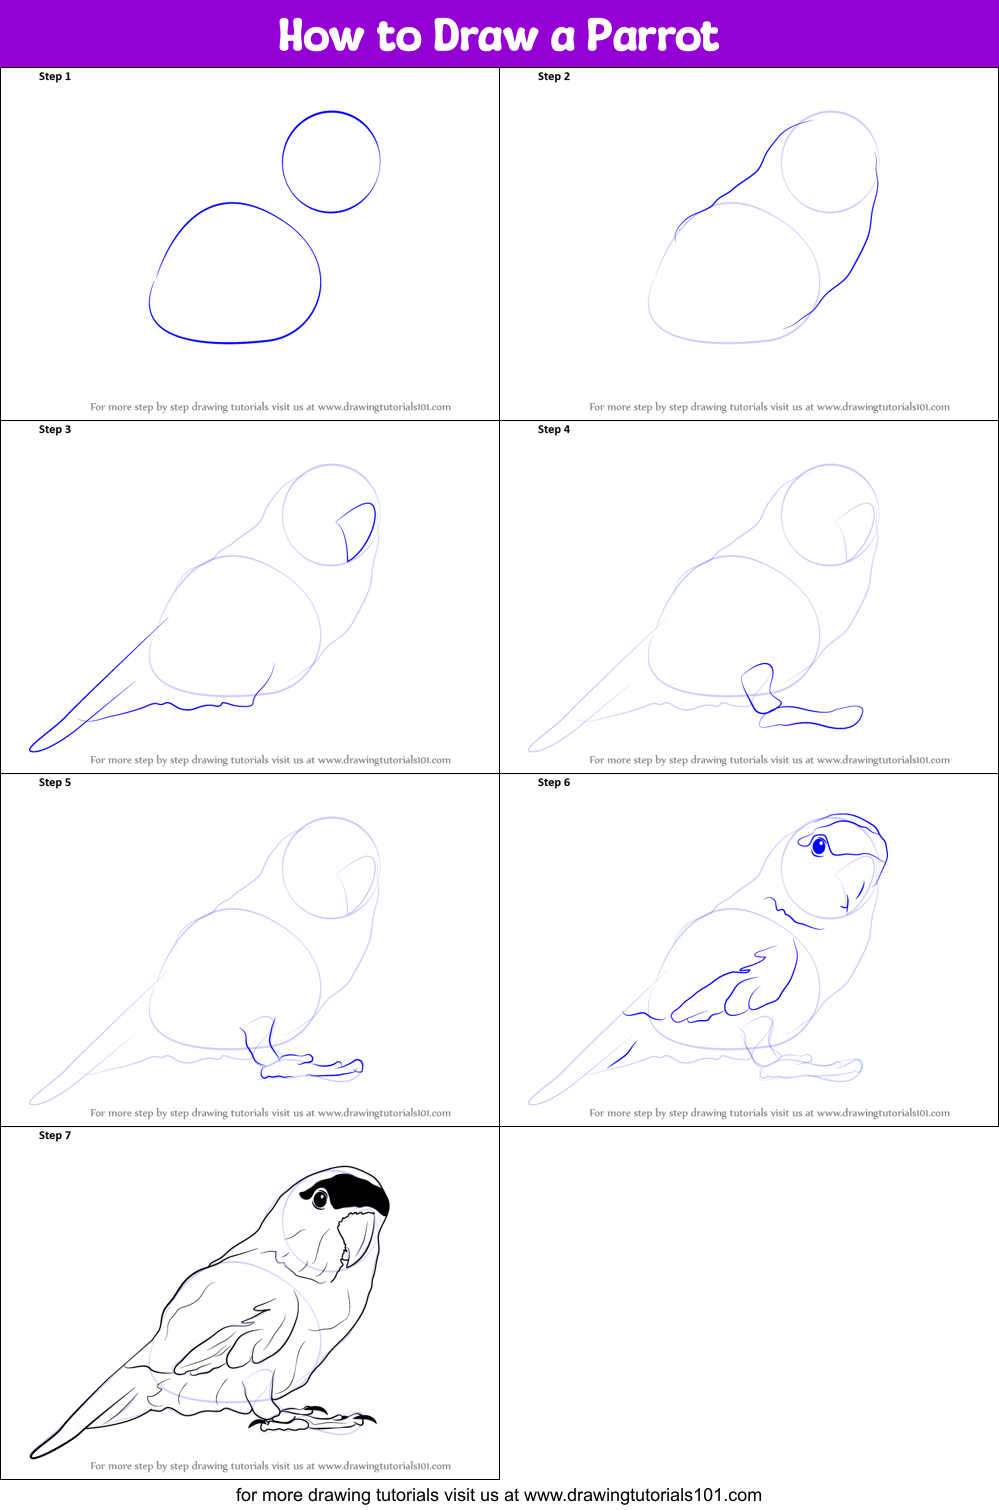 How to Draw a Parrot printable step by step drawing sheet 